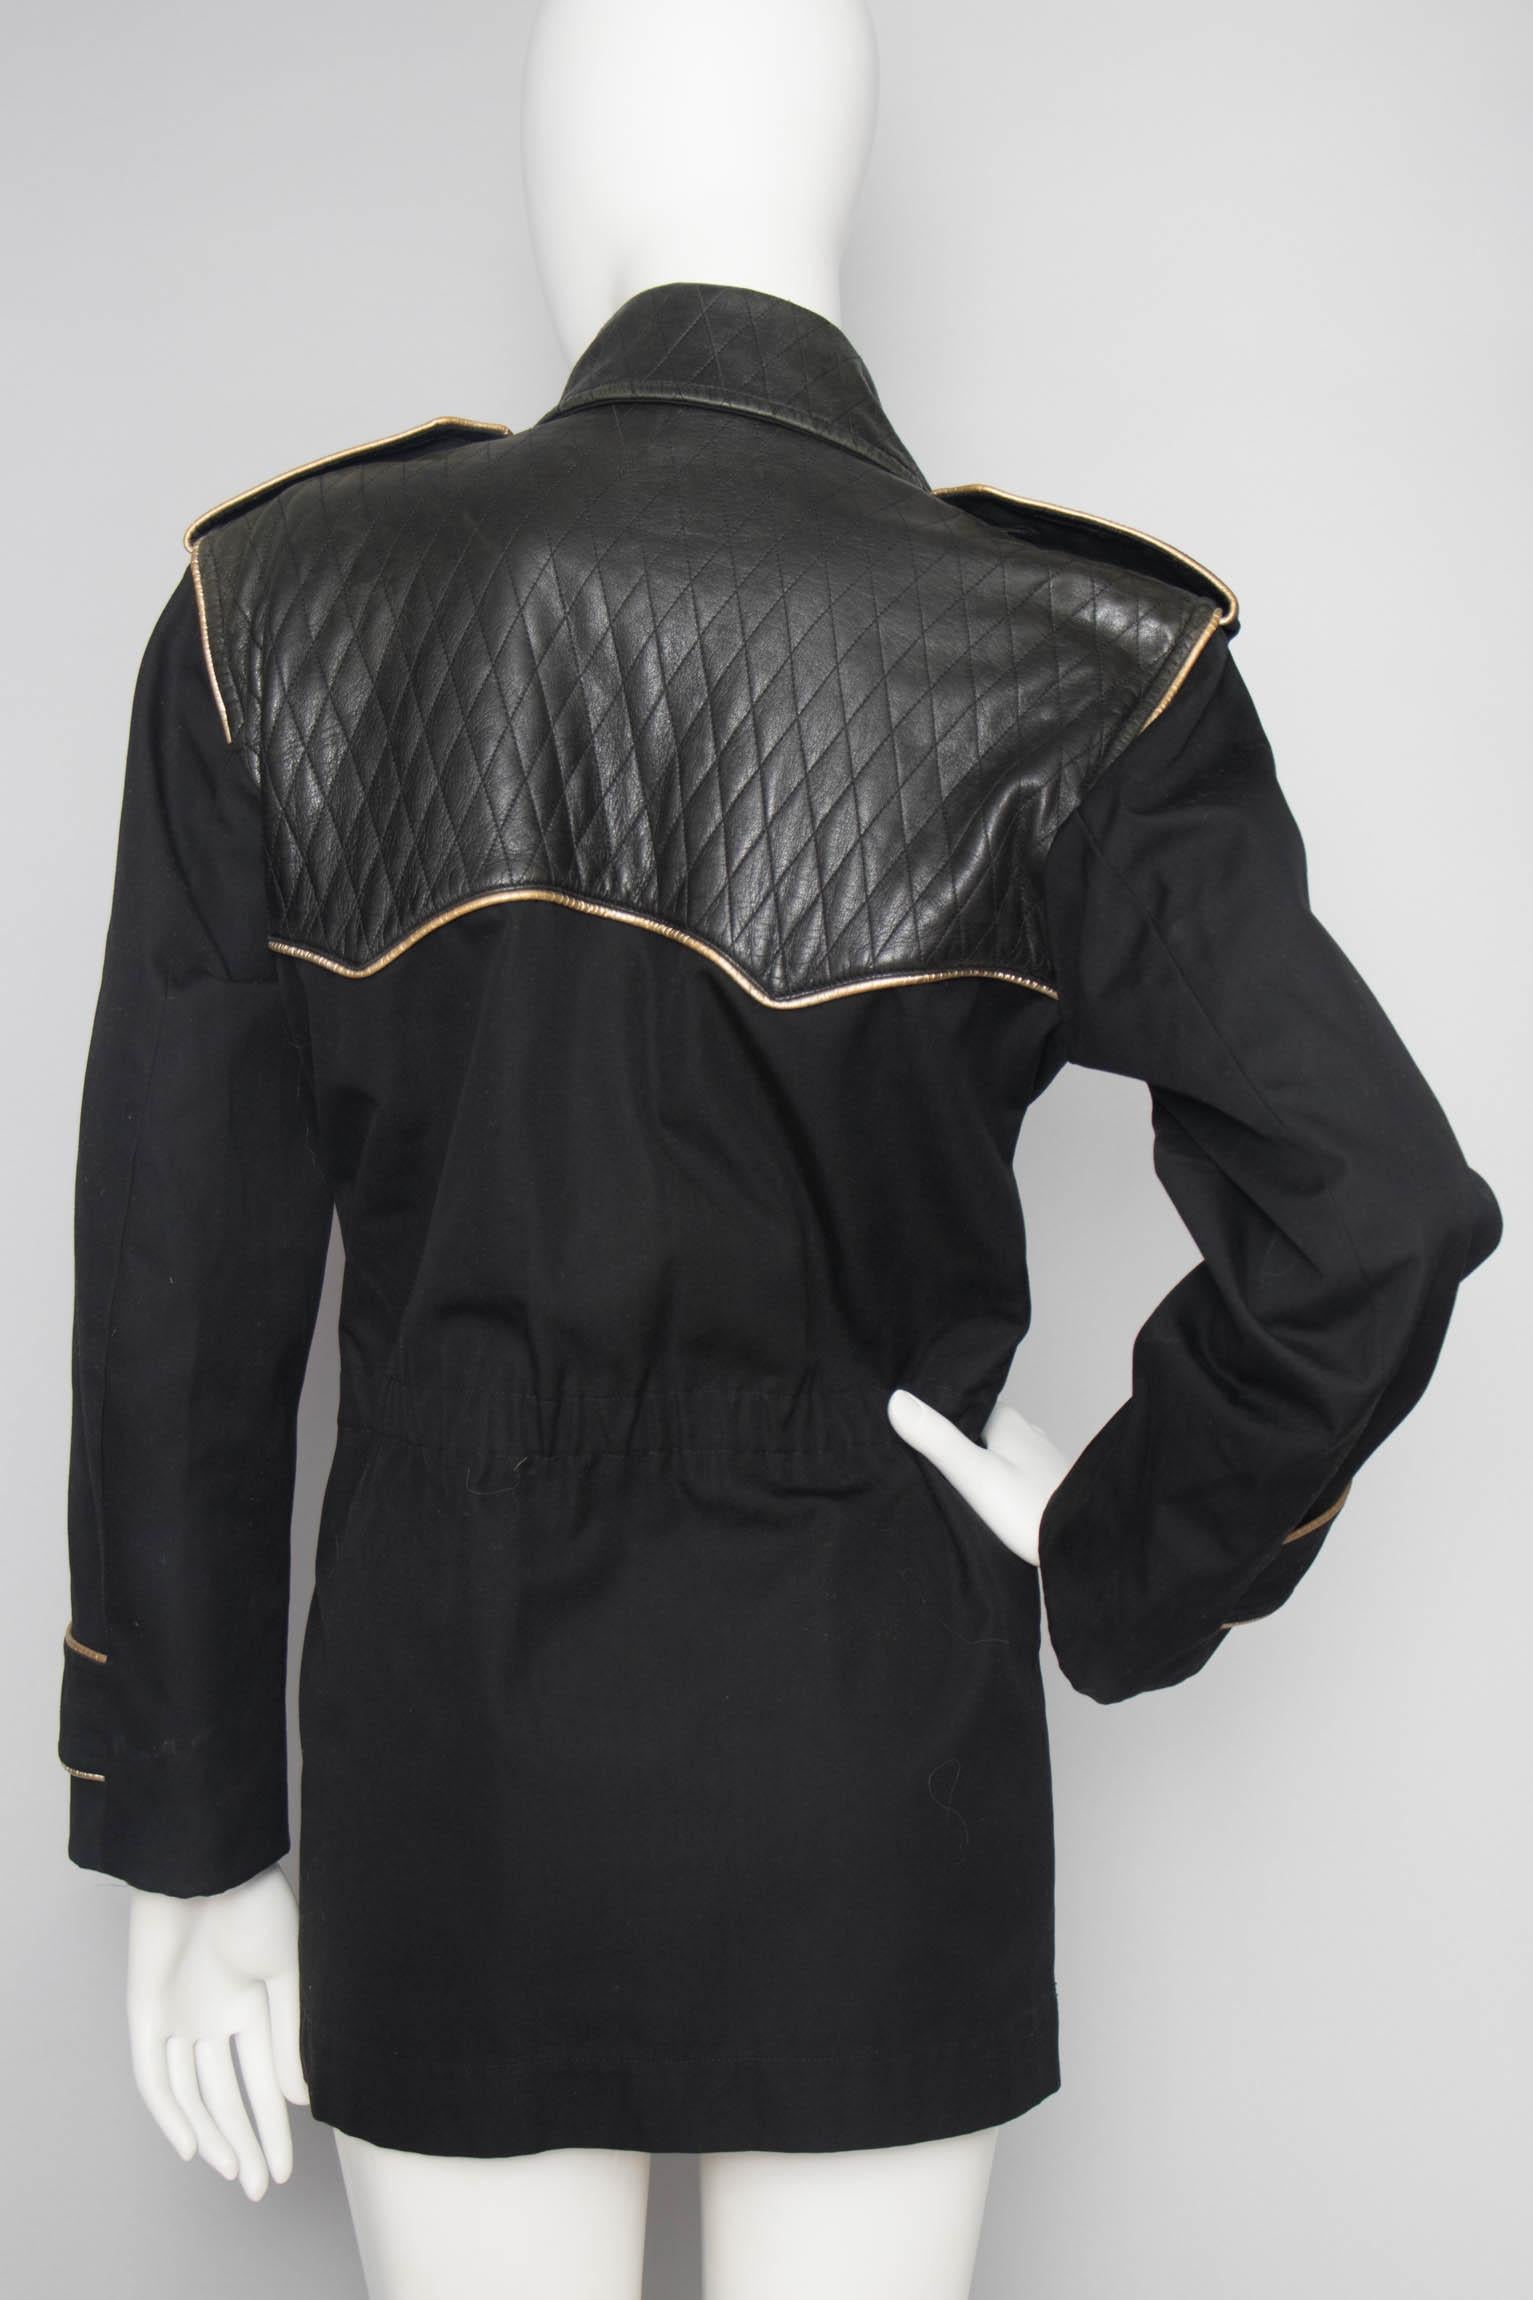 Black Yves Saint Laurent Rive Gauche Jacket with Leather and Gold Trim, 1980s